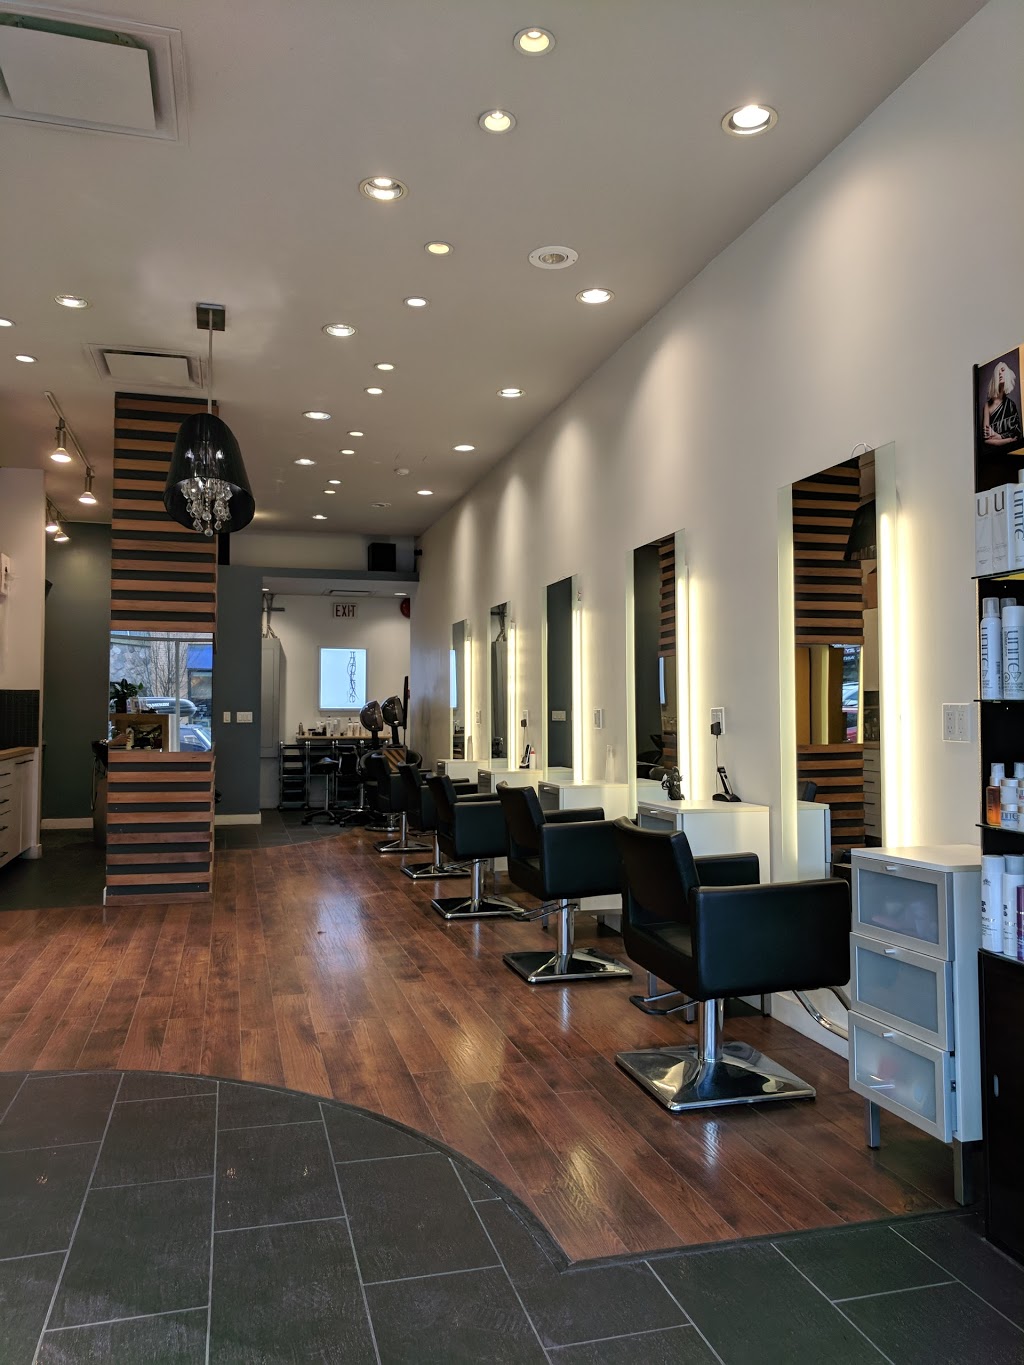 Mousse Salon | hair care | 2641 W 4th Ave, Vancouver, BC V6K 1P8, Canada | 6045688828 OR +1 604-568-8828